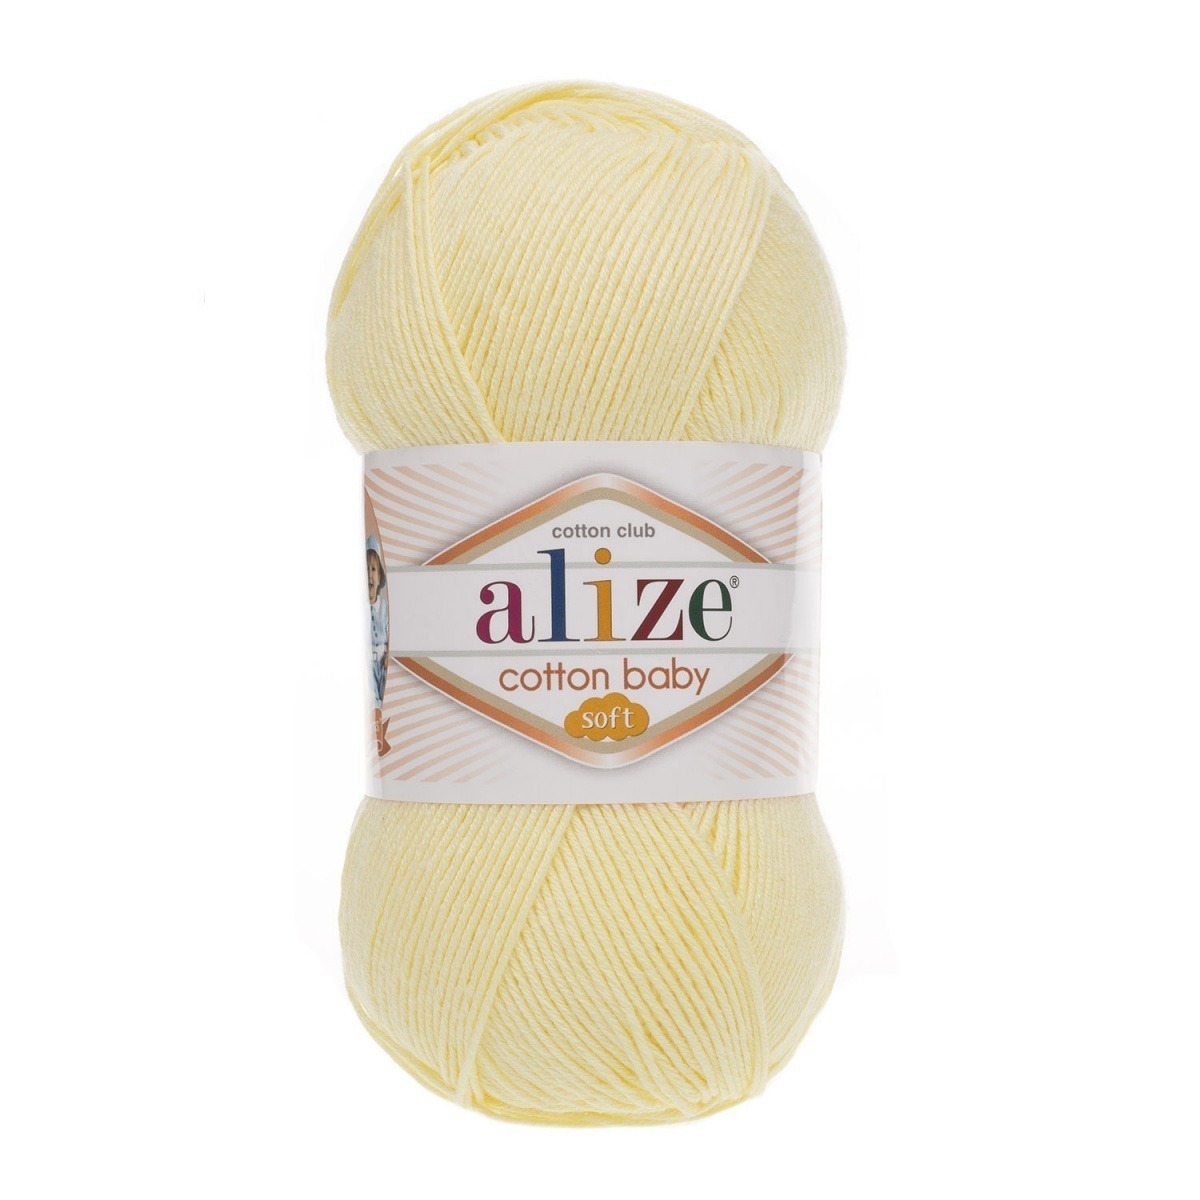 Alize "Cotton baby soft" (13)